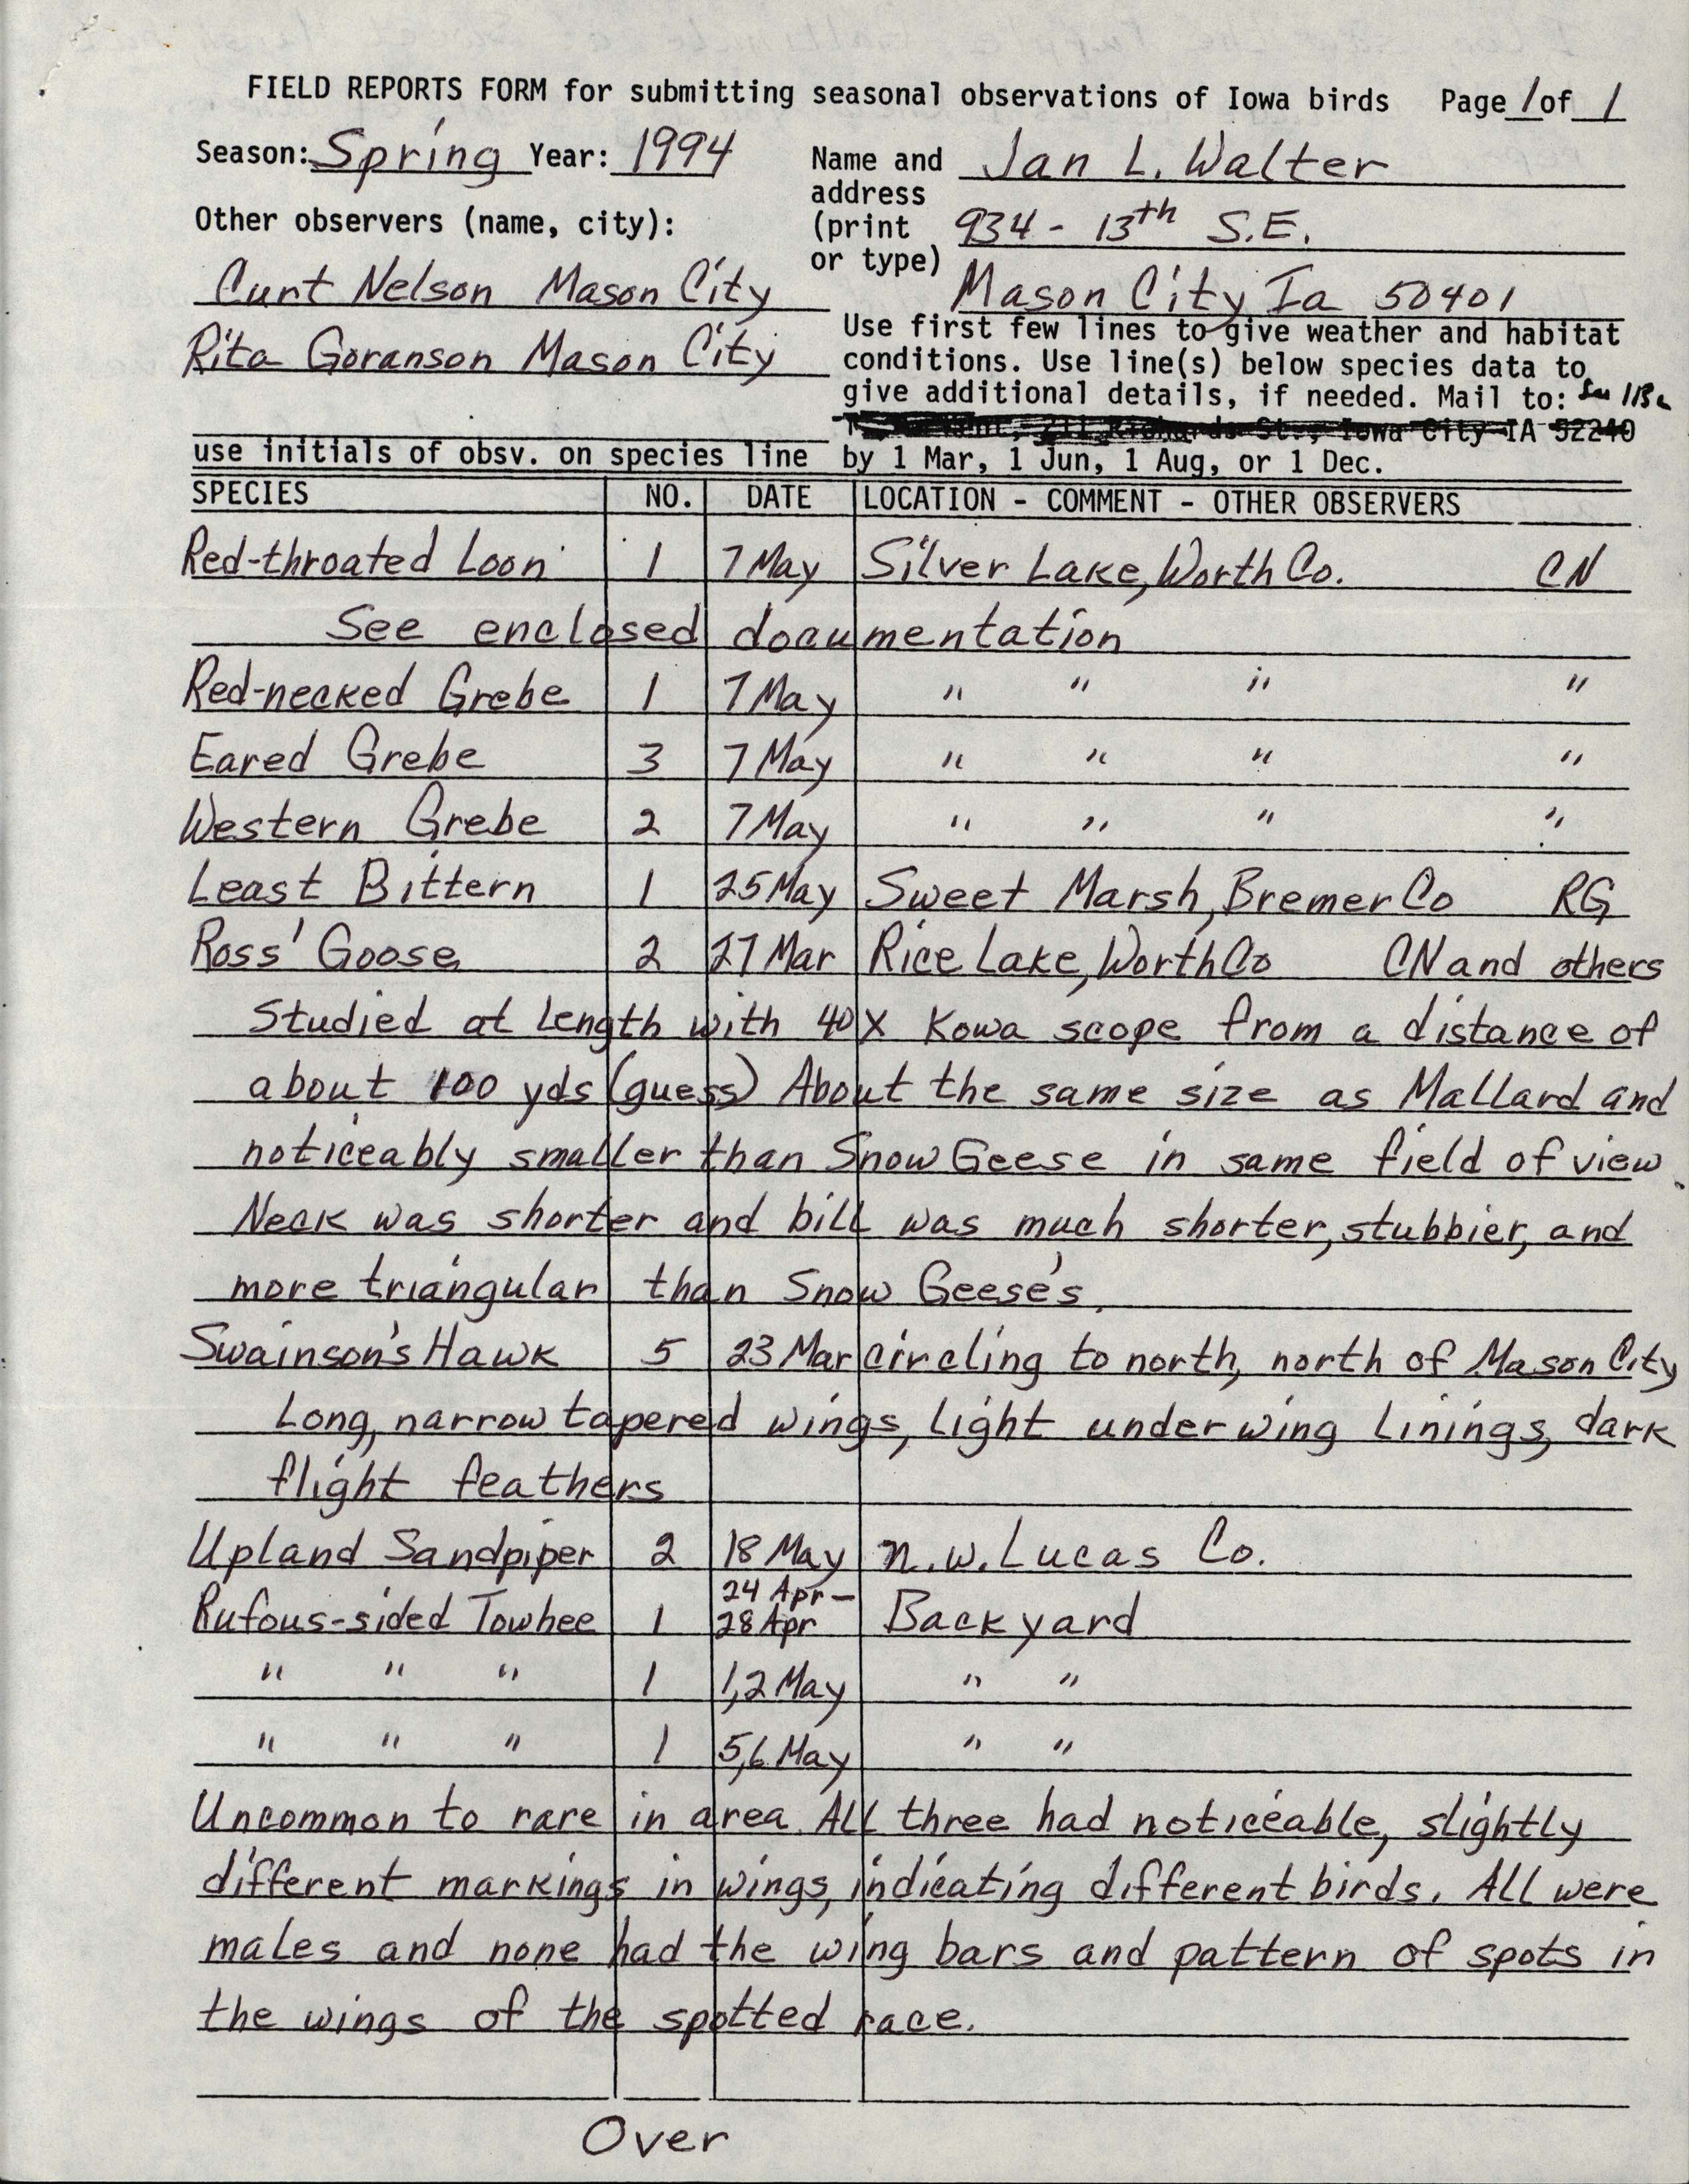 Field reports form for submitting seasonal observations of Iowa birds, Jan Walter, Spring 1994